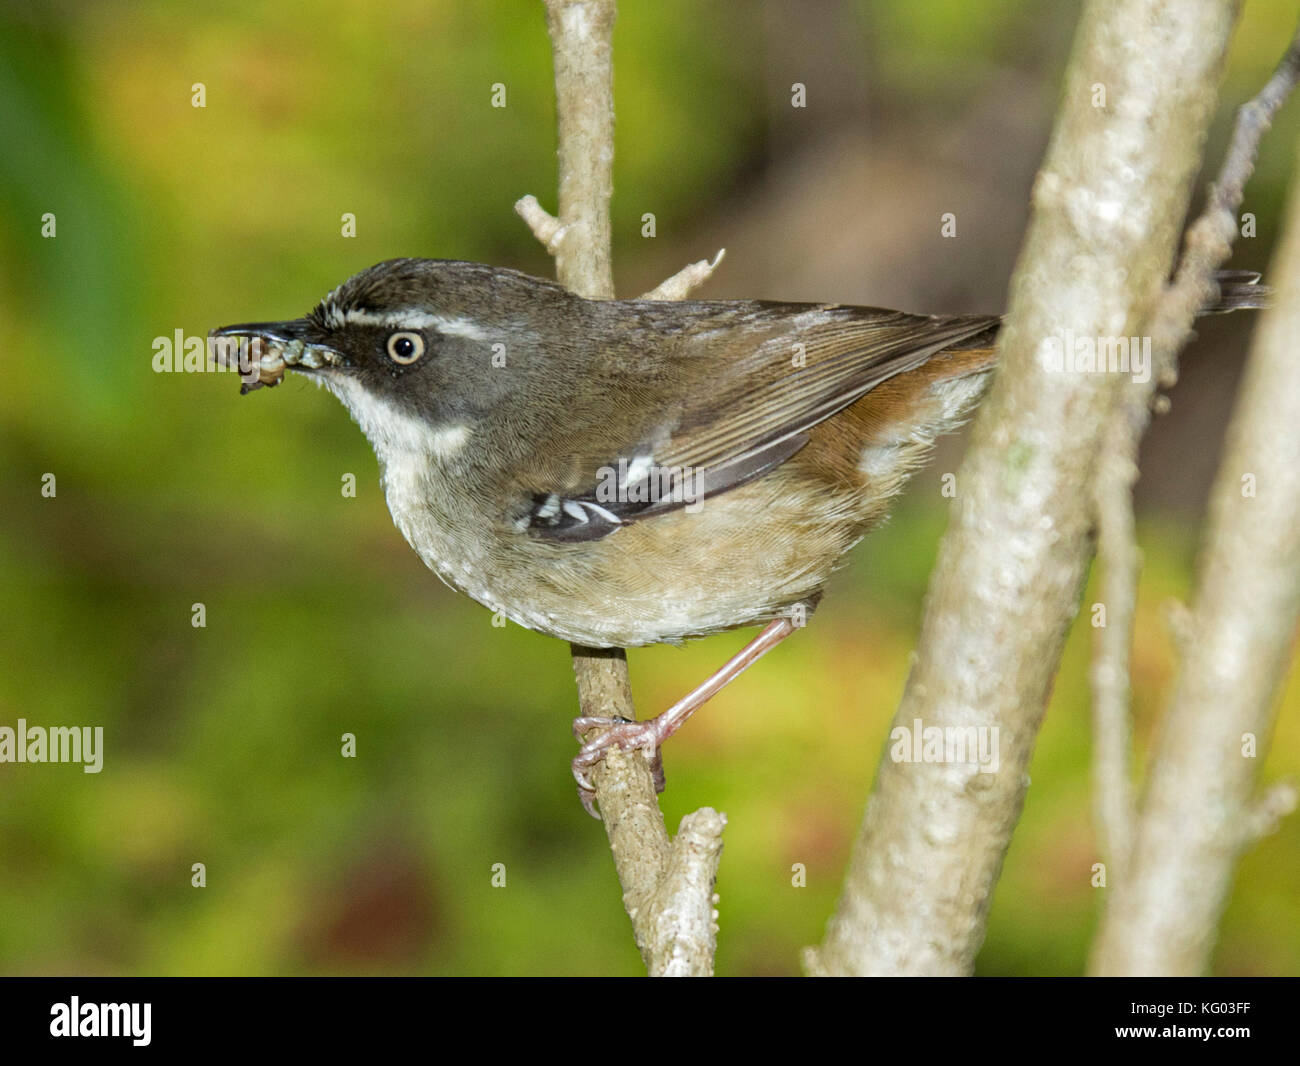 Australian white-browed scrubwren, Sericornis frontalis, against light green background in garden carrying food for chick in bill Stock Photo